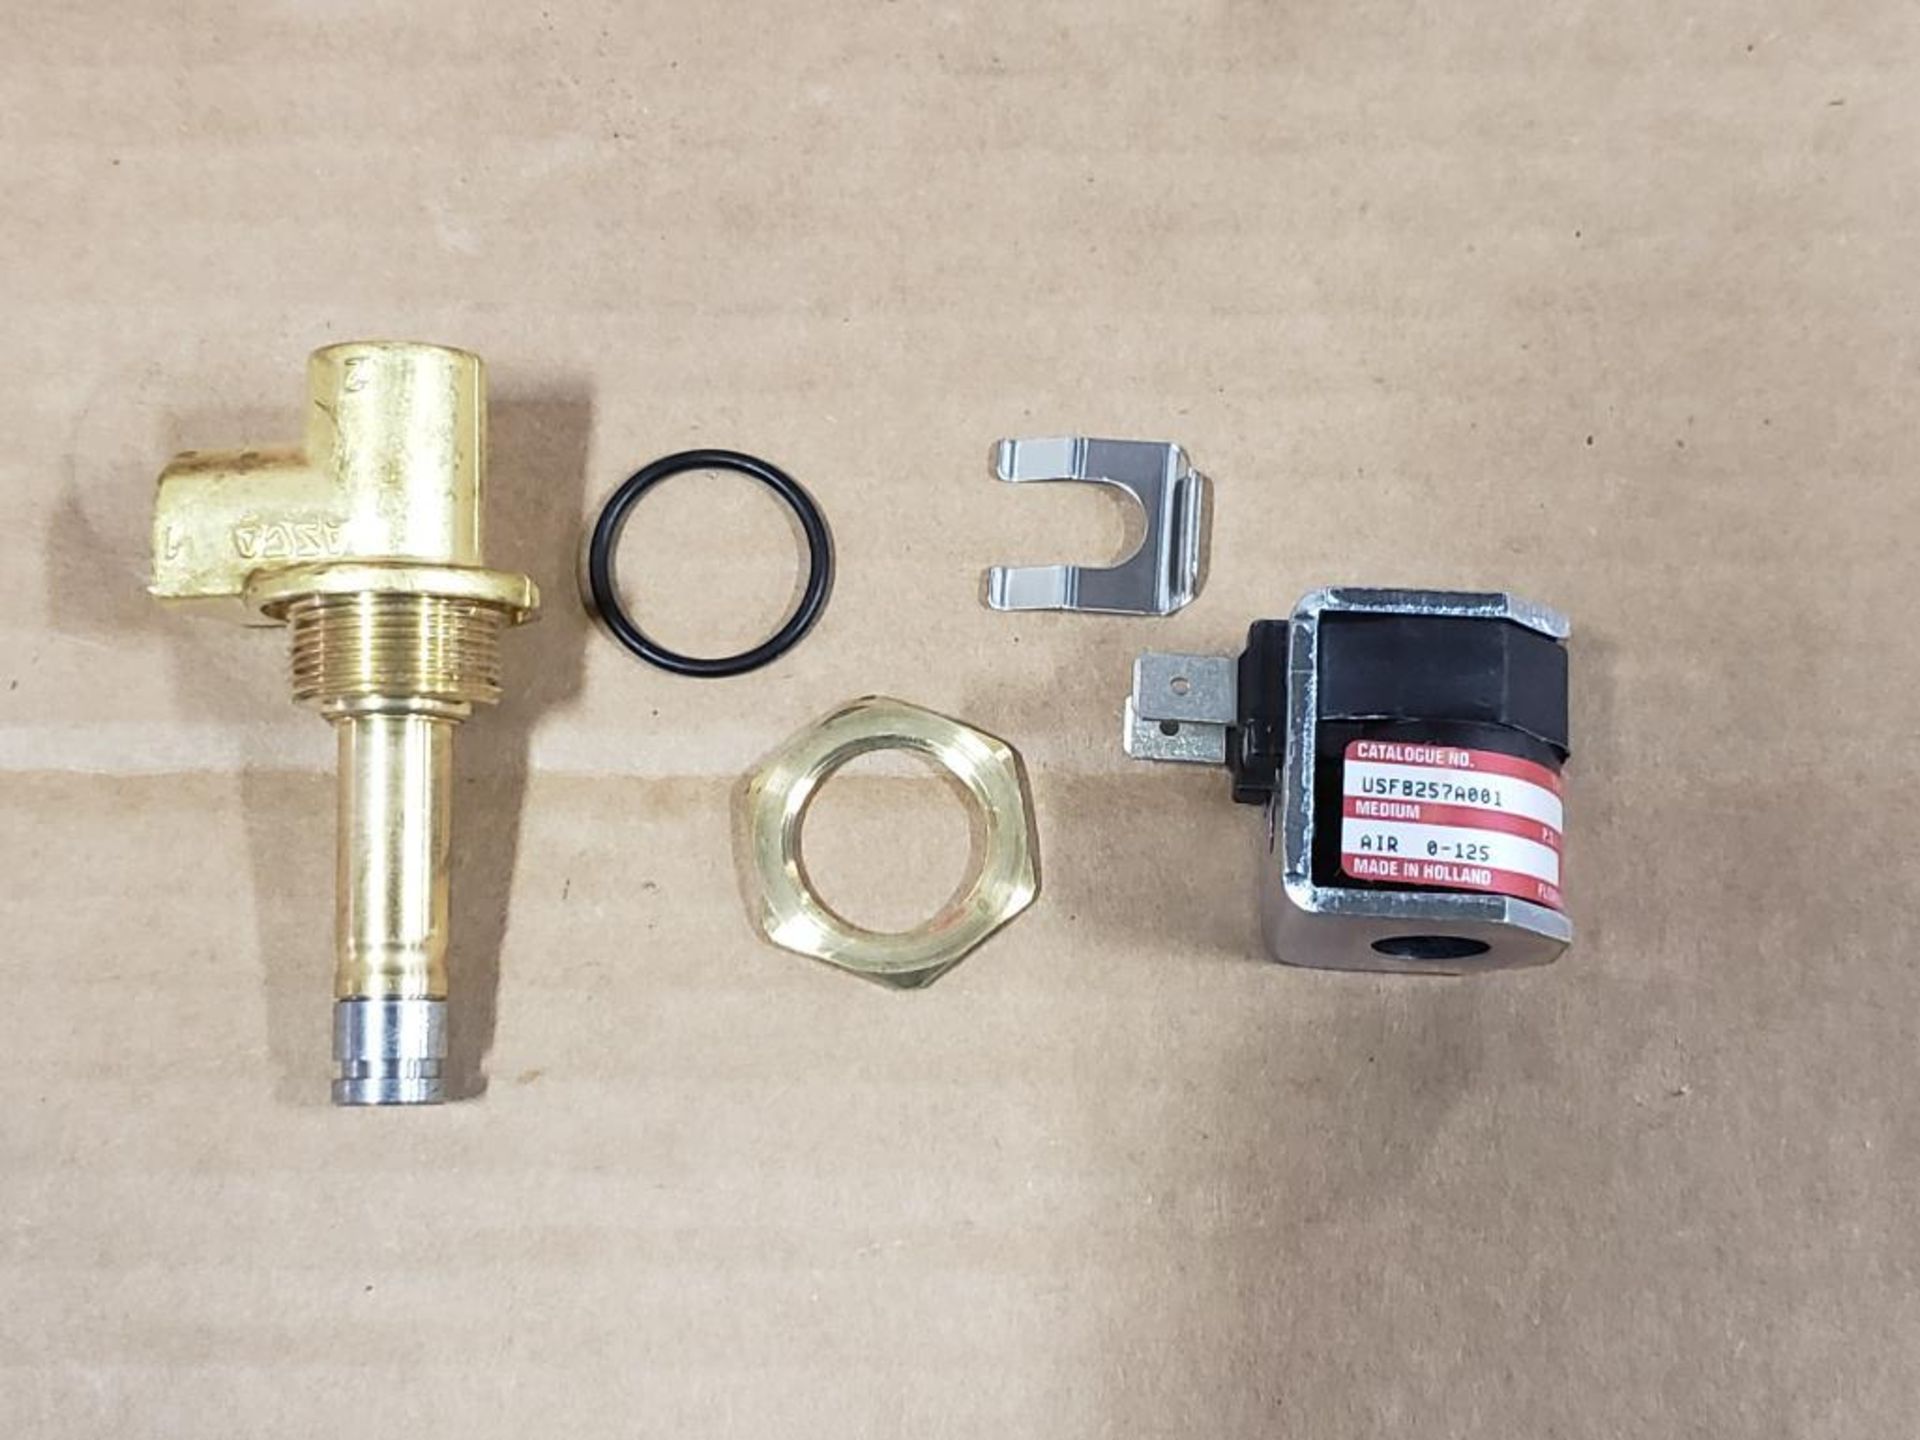 Qty 24 - ASCO USF8257A001 0-125psi air solenoid valve. 400135-642 24VDC 22W Coil. New no package. - Image 2 of 5